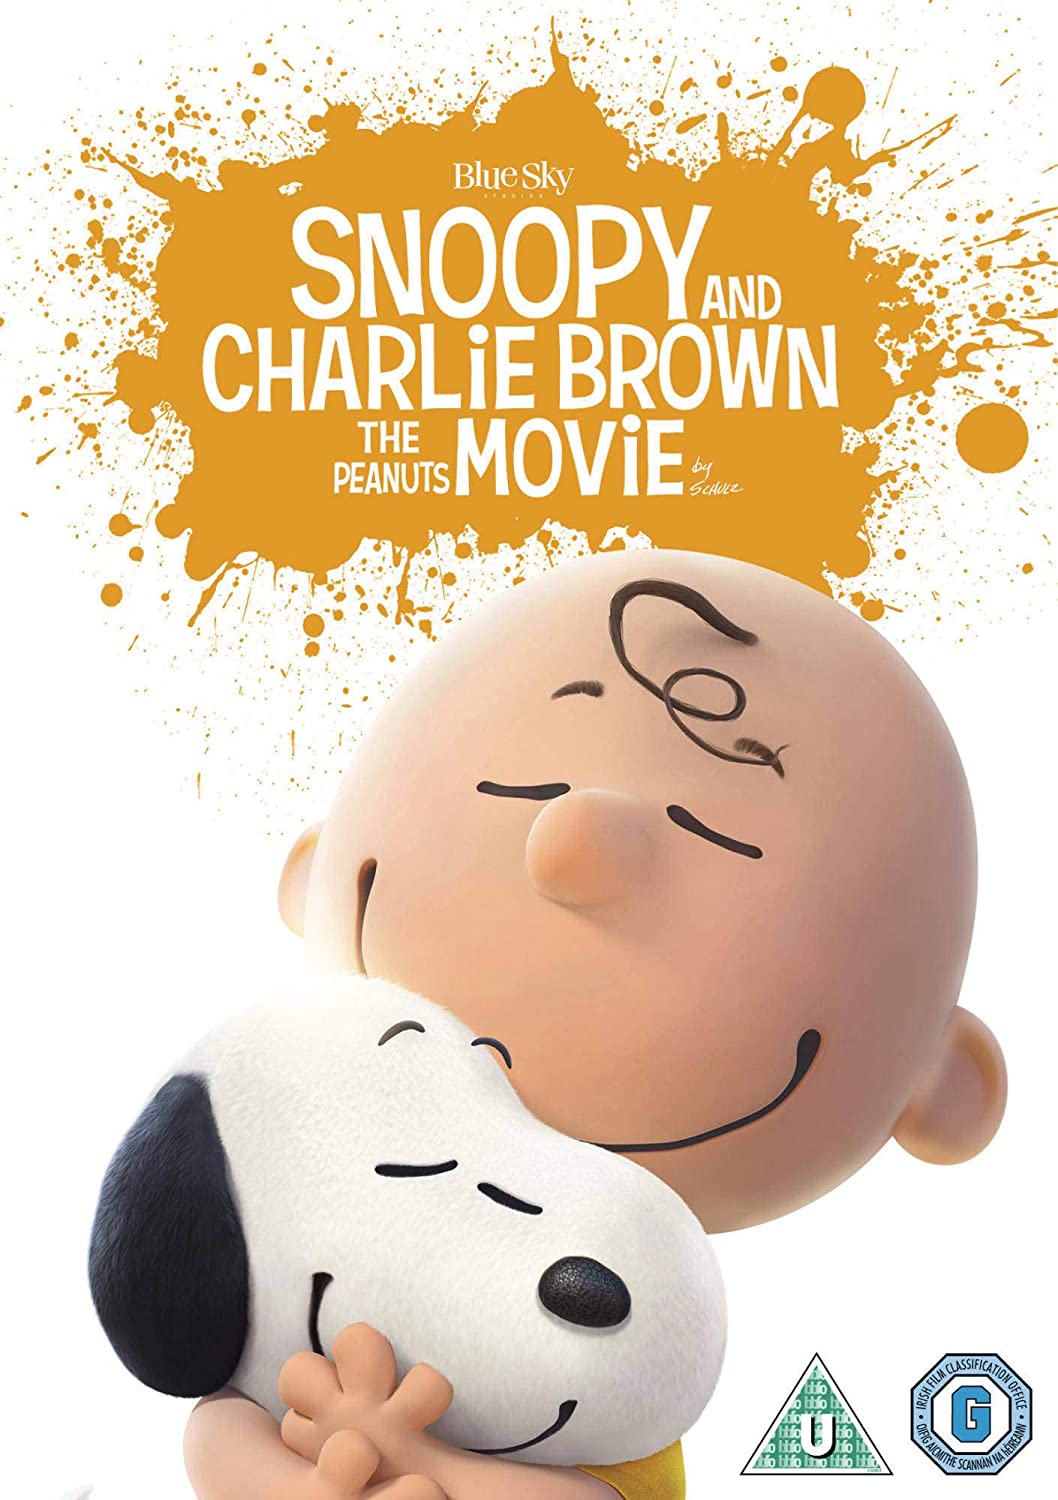 Snoopy and Charlie Brown - The Peanuts Movie - Family/Comedy [DVD]